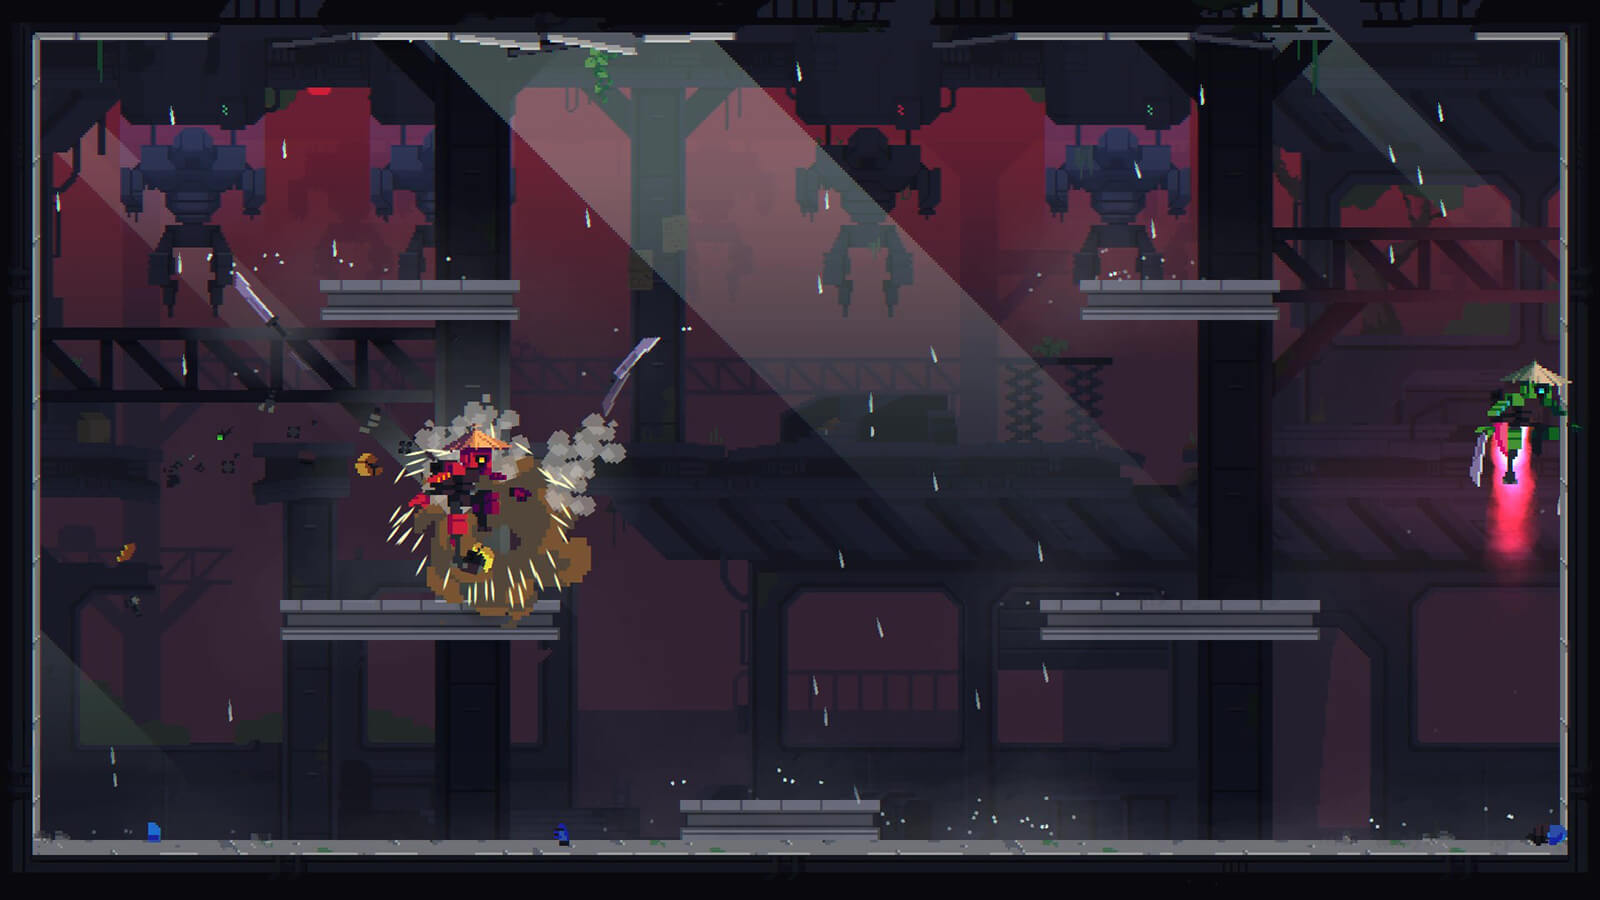 A yellow robot explodes as a red robot jumps past it. A green robot hovers on the edge of the stage.